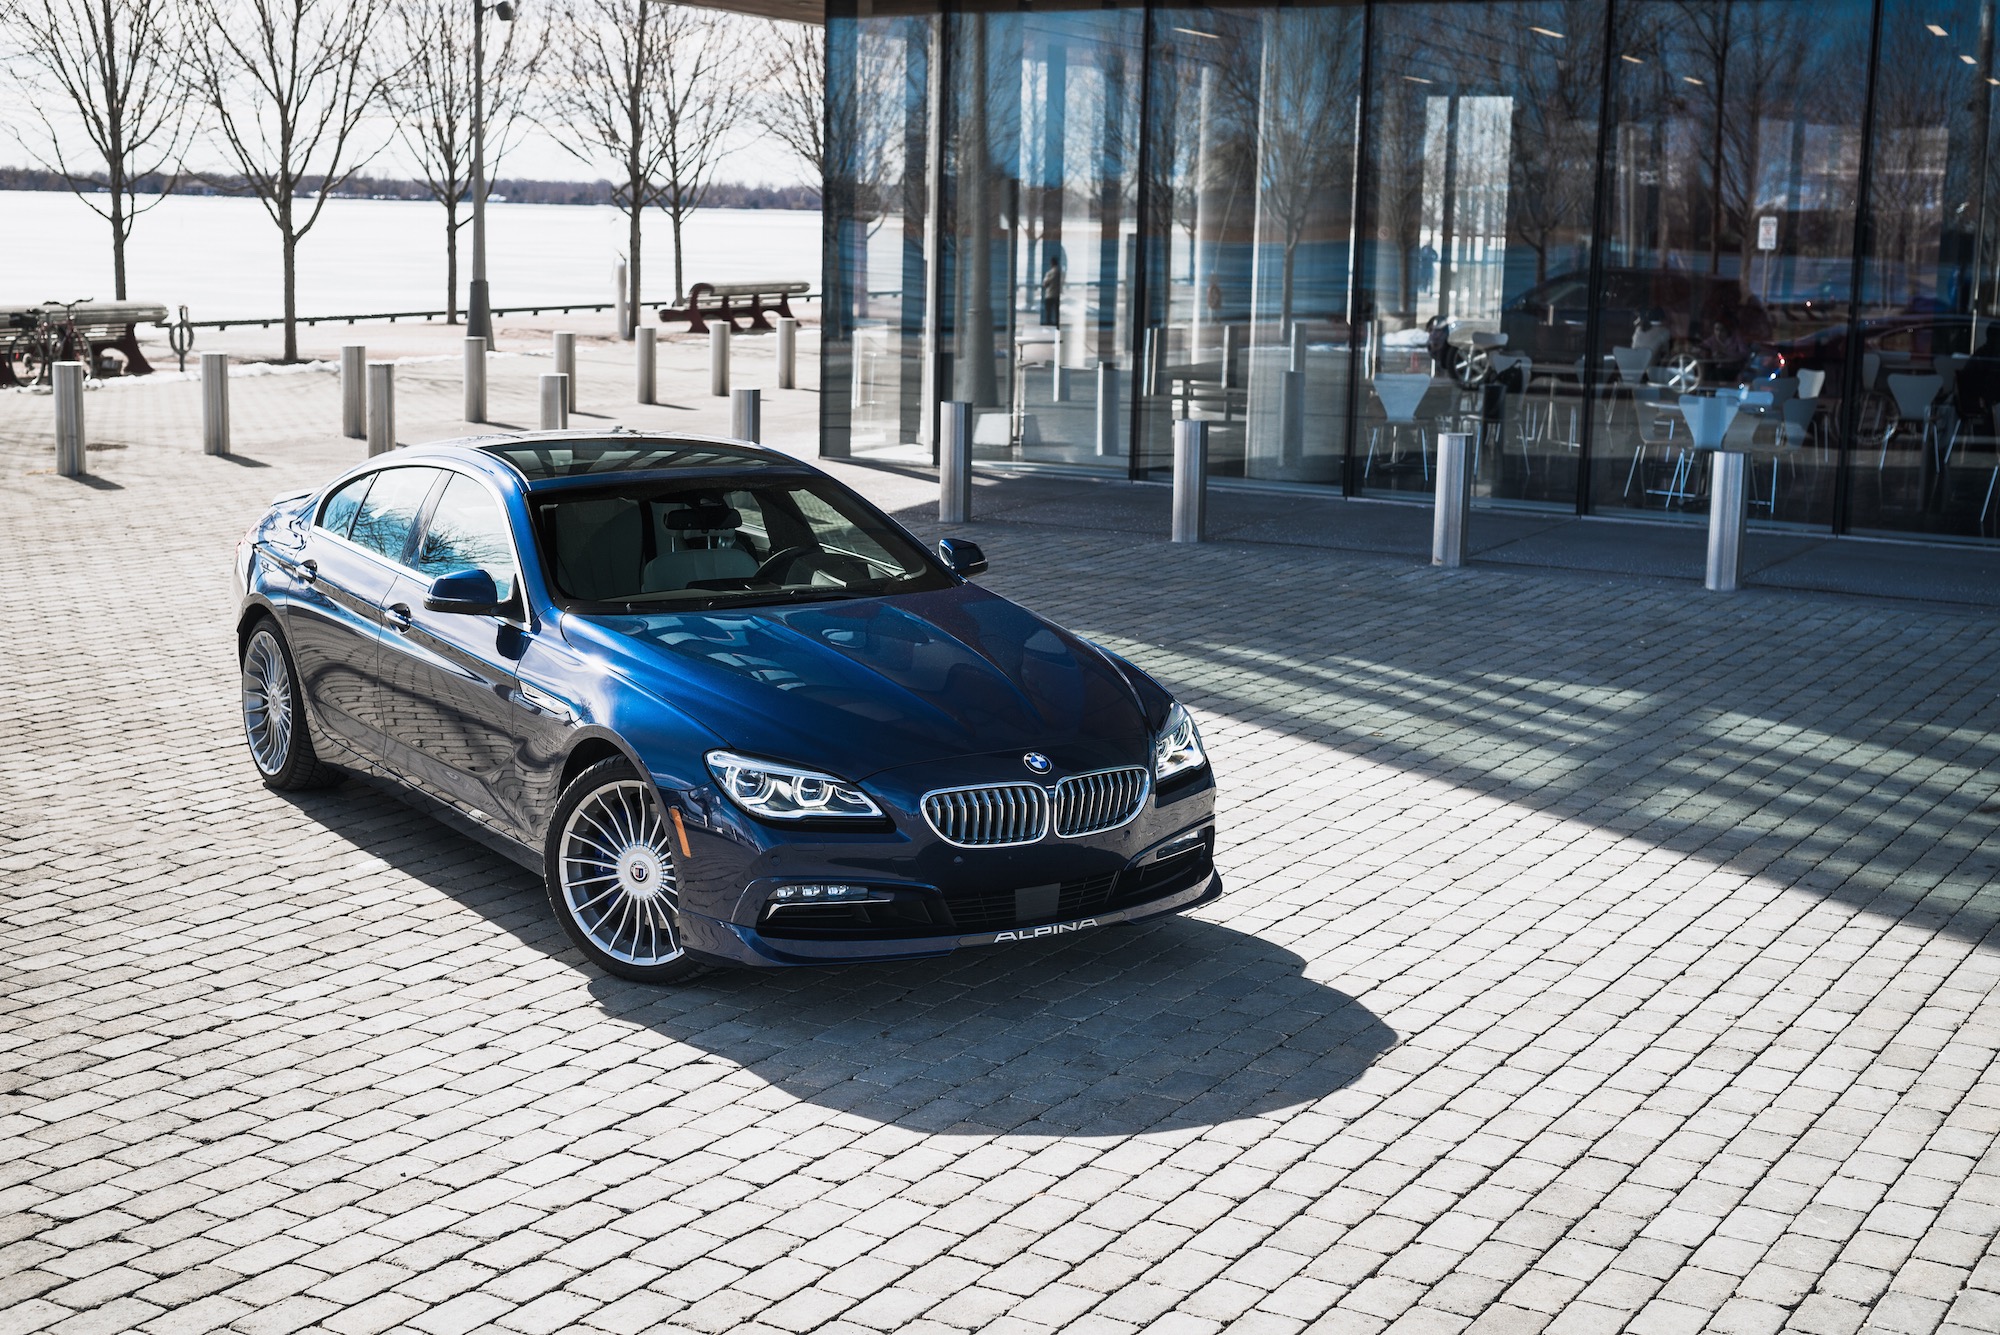 Review: 2016 BMW Alpina B6 xDrive Gran Coupe | Canadian Auto Review